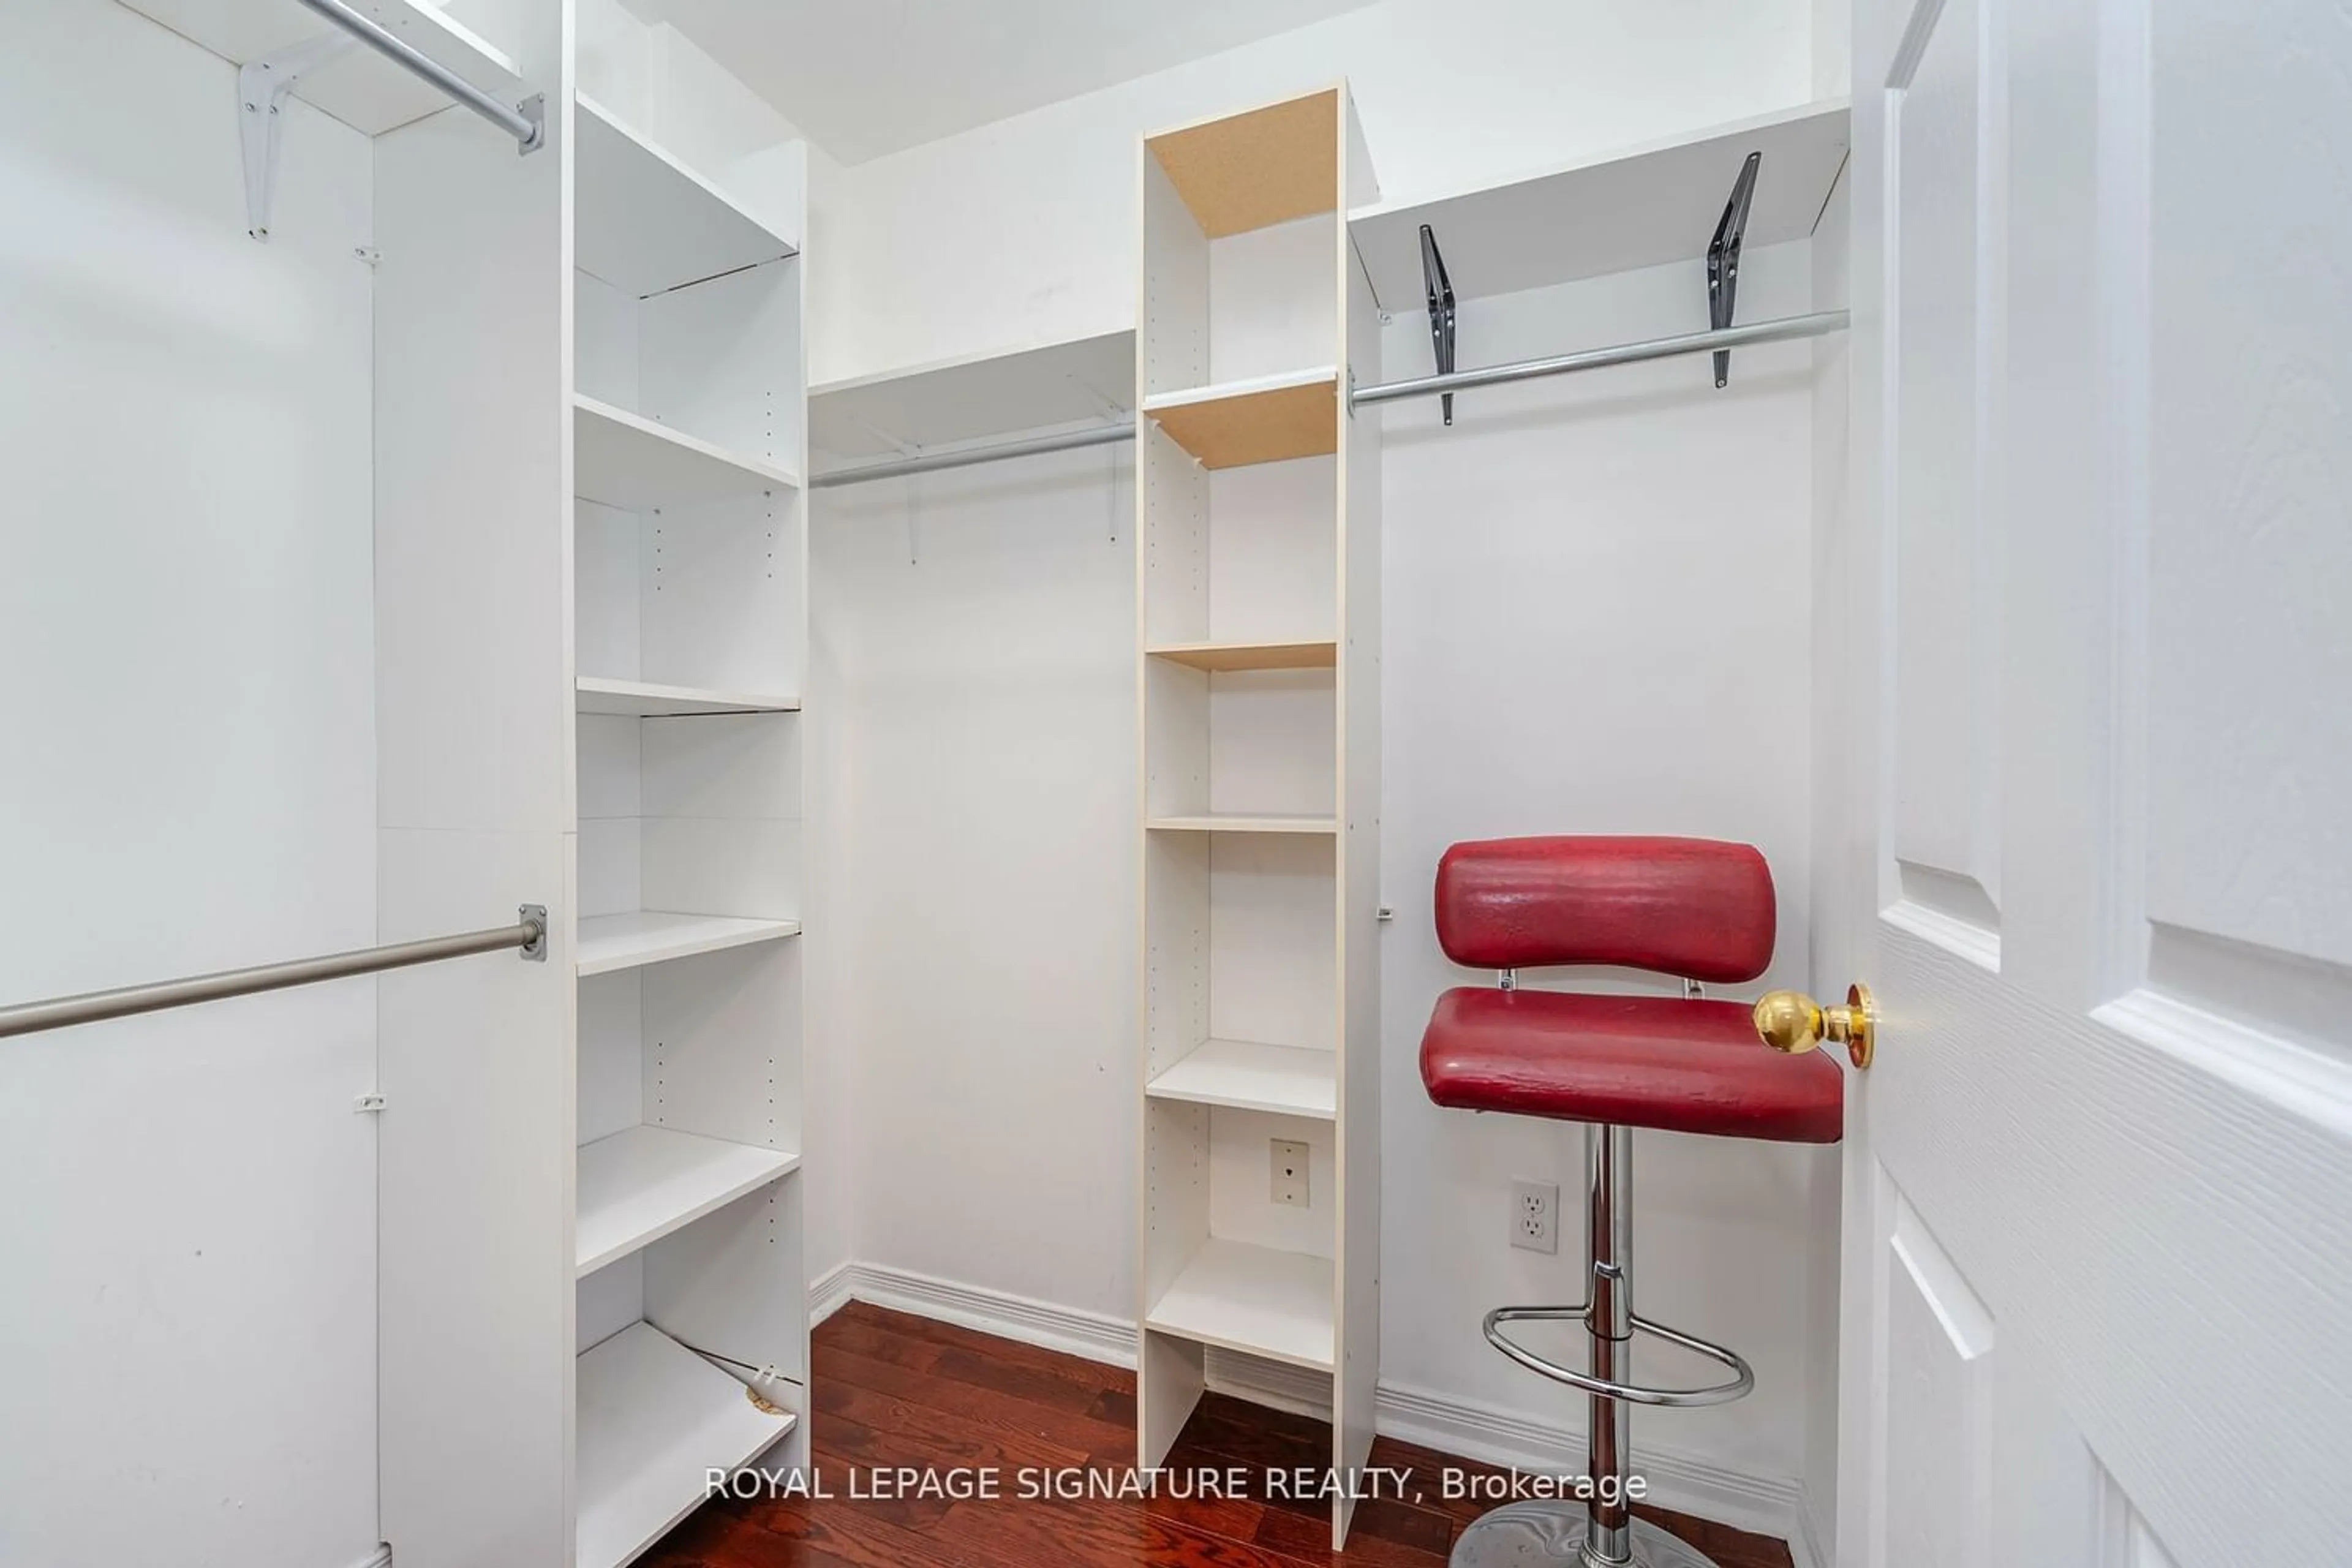 Storage room or clothes room or walk-in closet for 5260 Mcfarren Blvd #162, Mississauga Ontario L5M 7J1